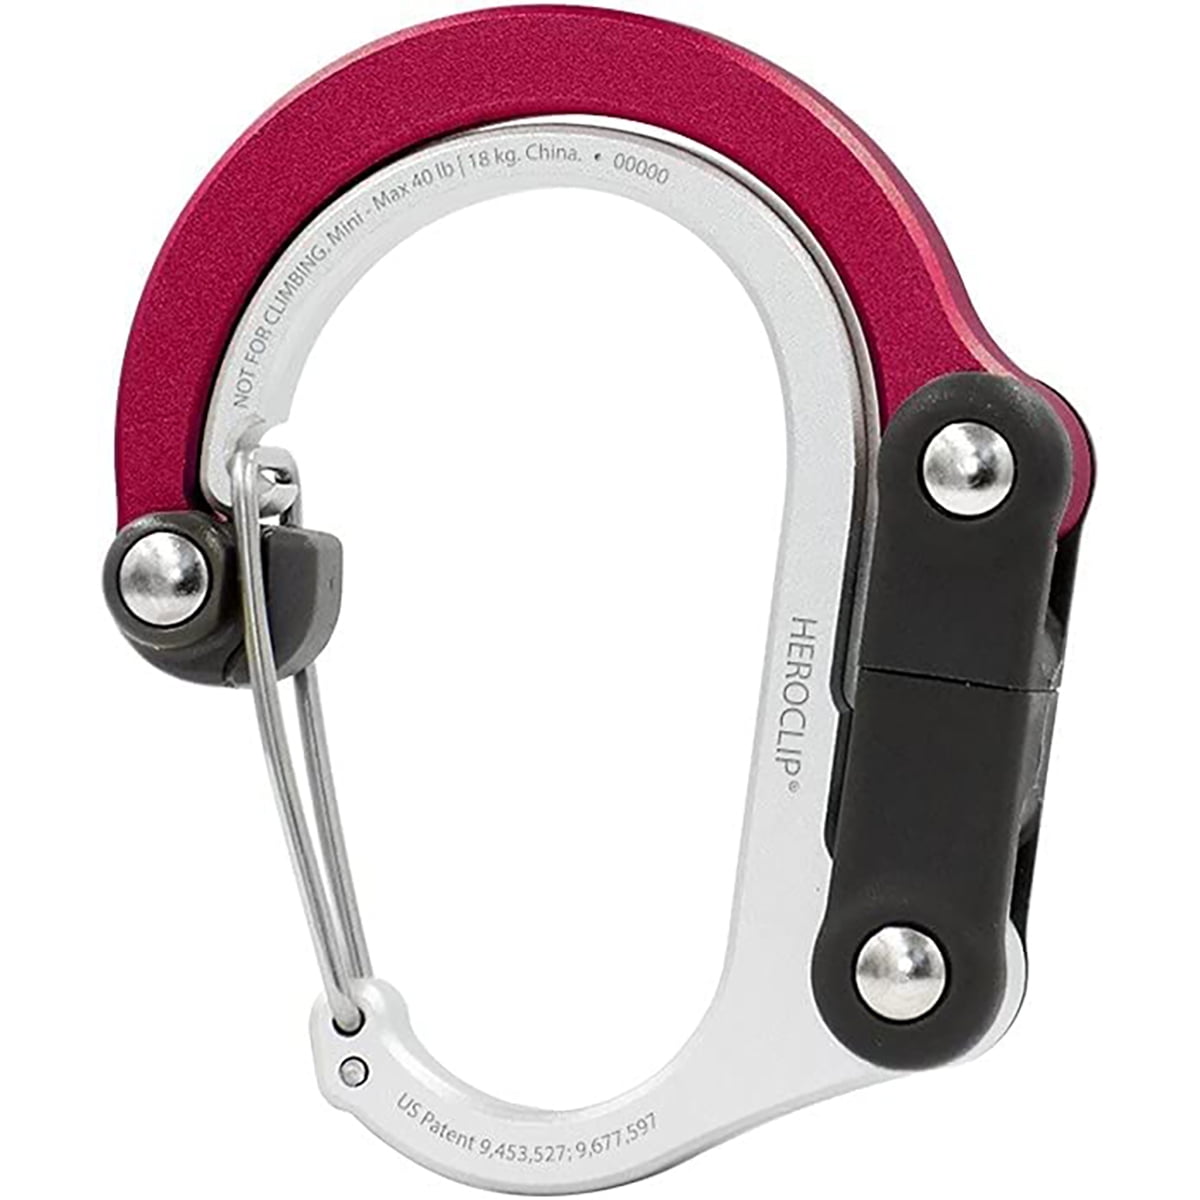 GEAR AID HEROCLIP Carabiner Clip and Hook (Small) for Purse, Stroller, and  Backpack (Hot Rod Red) 